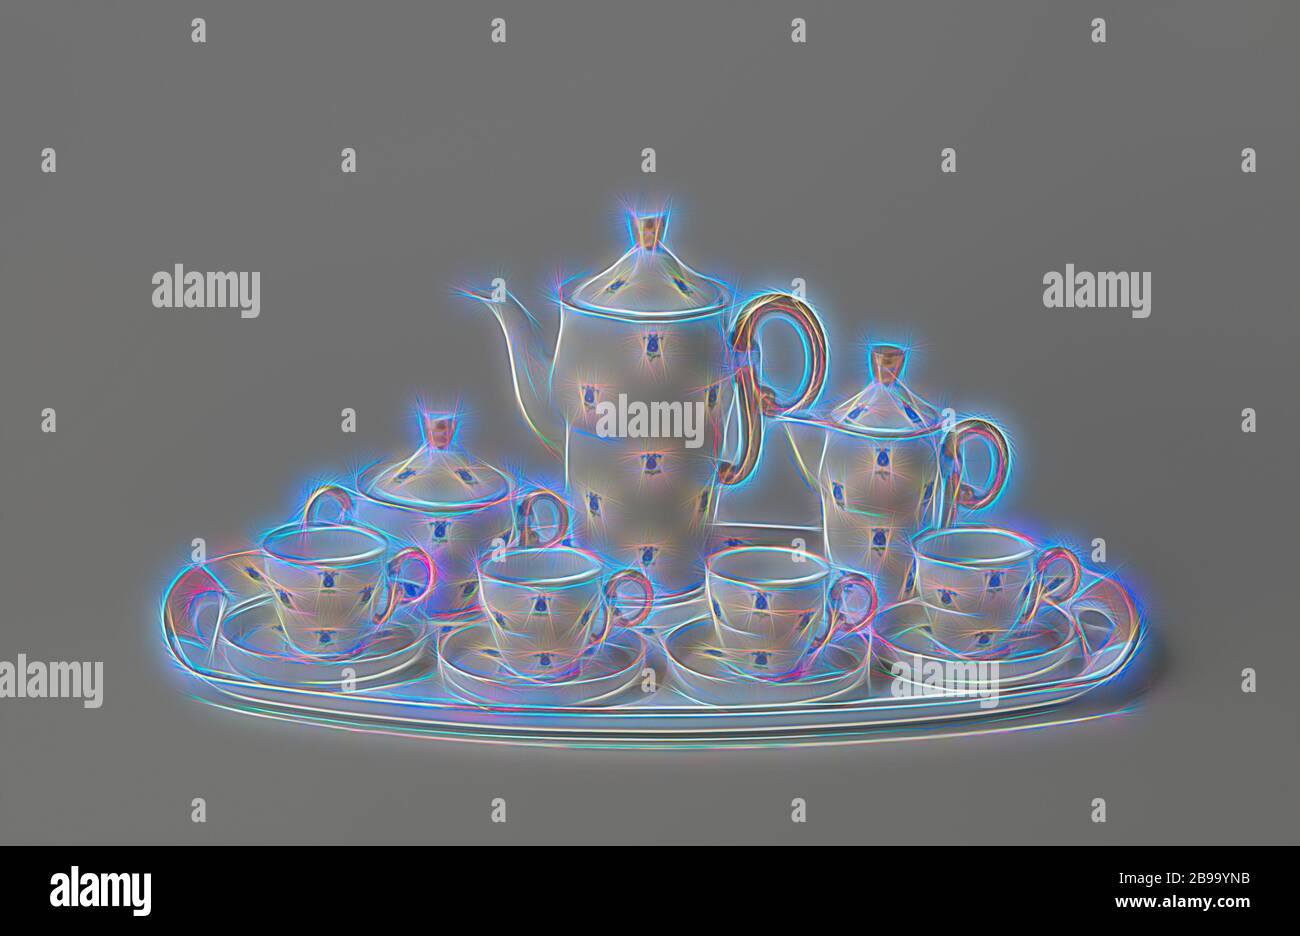 Coffee service with flowers, Porcelain coffee set, painted on the glaze in blue, red, green and gold. The service consists of twelve parts, including a tray, coffee pot, milk jug, sugar bowl and four cups with saucers. All decorated with blue flowers. Marked on the bottom with the crossed hammers with crown., Pirkenhammer, Karlovy Vary, c. 1935, porcelain (material), glaze, gold (metal), vitrification, Reimagined by Gibon, design of warm cheerful glowing of brightness and light rays radiance. Classic art reinvented with a modern twist. Photography inspired by futurism, embracing dynamic energy Stock Photo